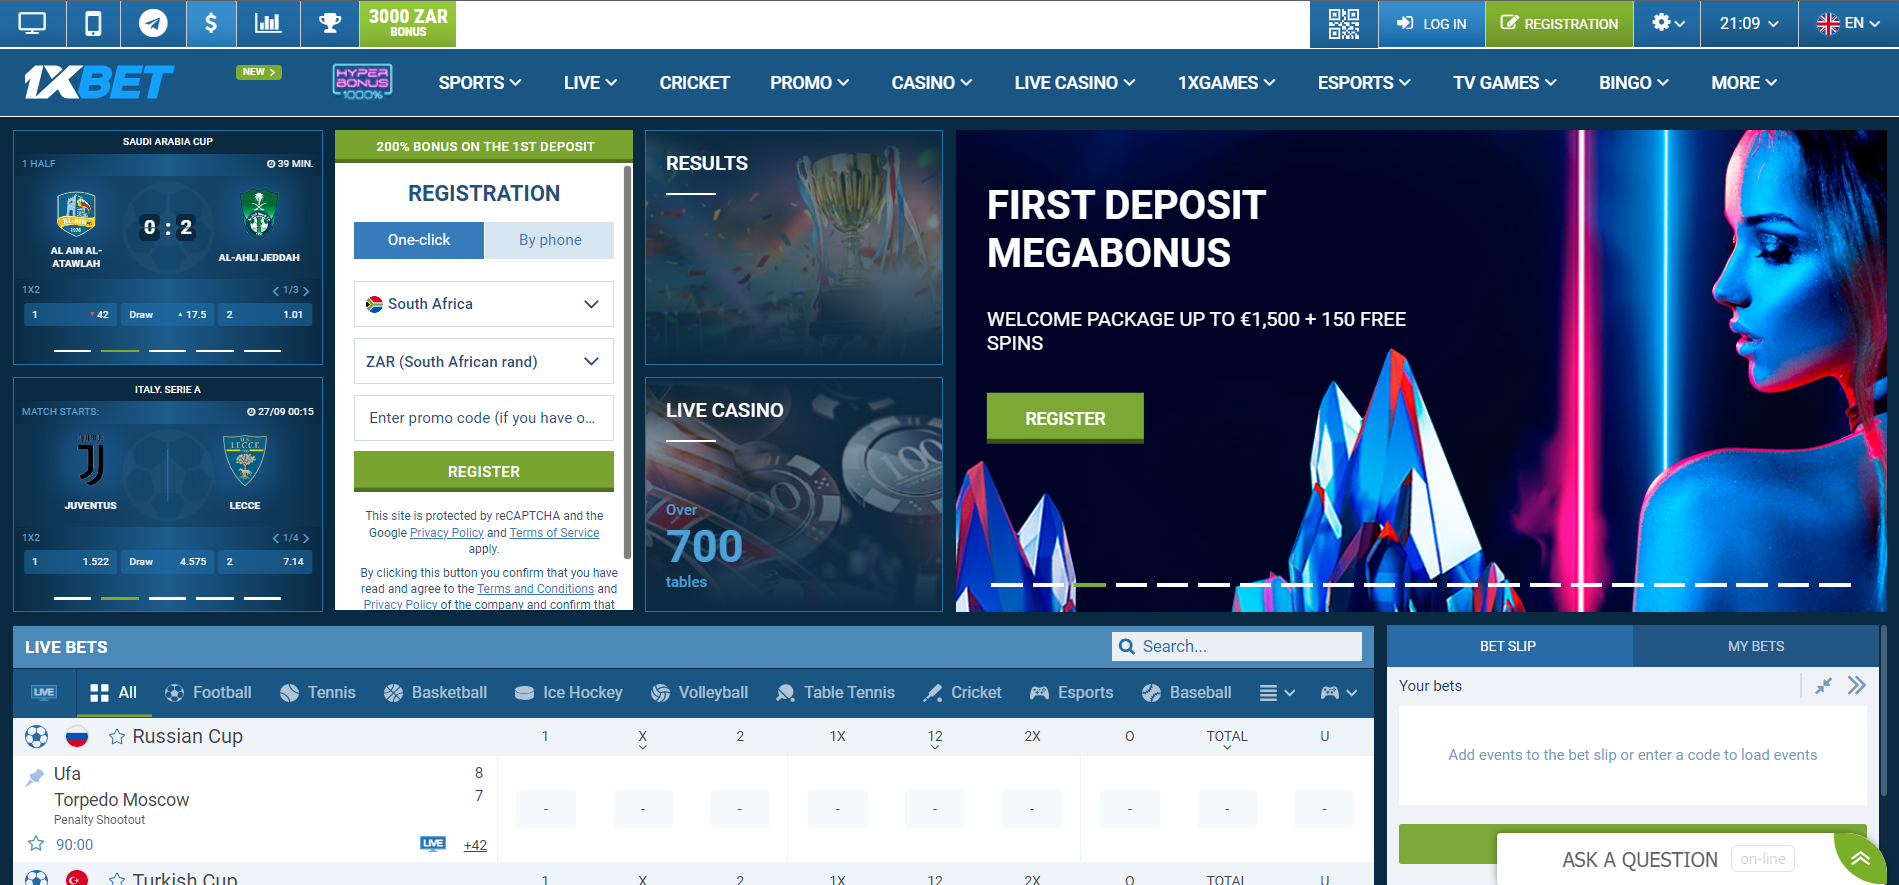 Image for 1xBet sportsbook homepage